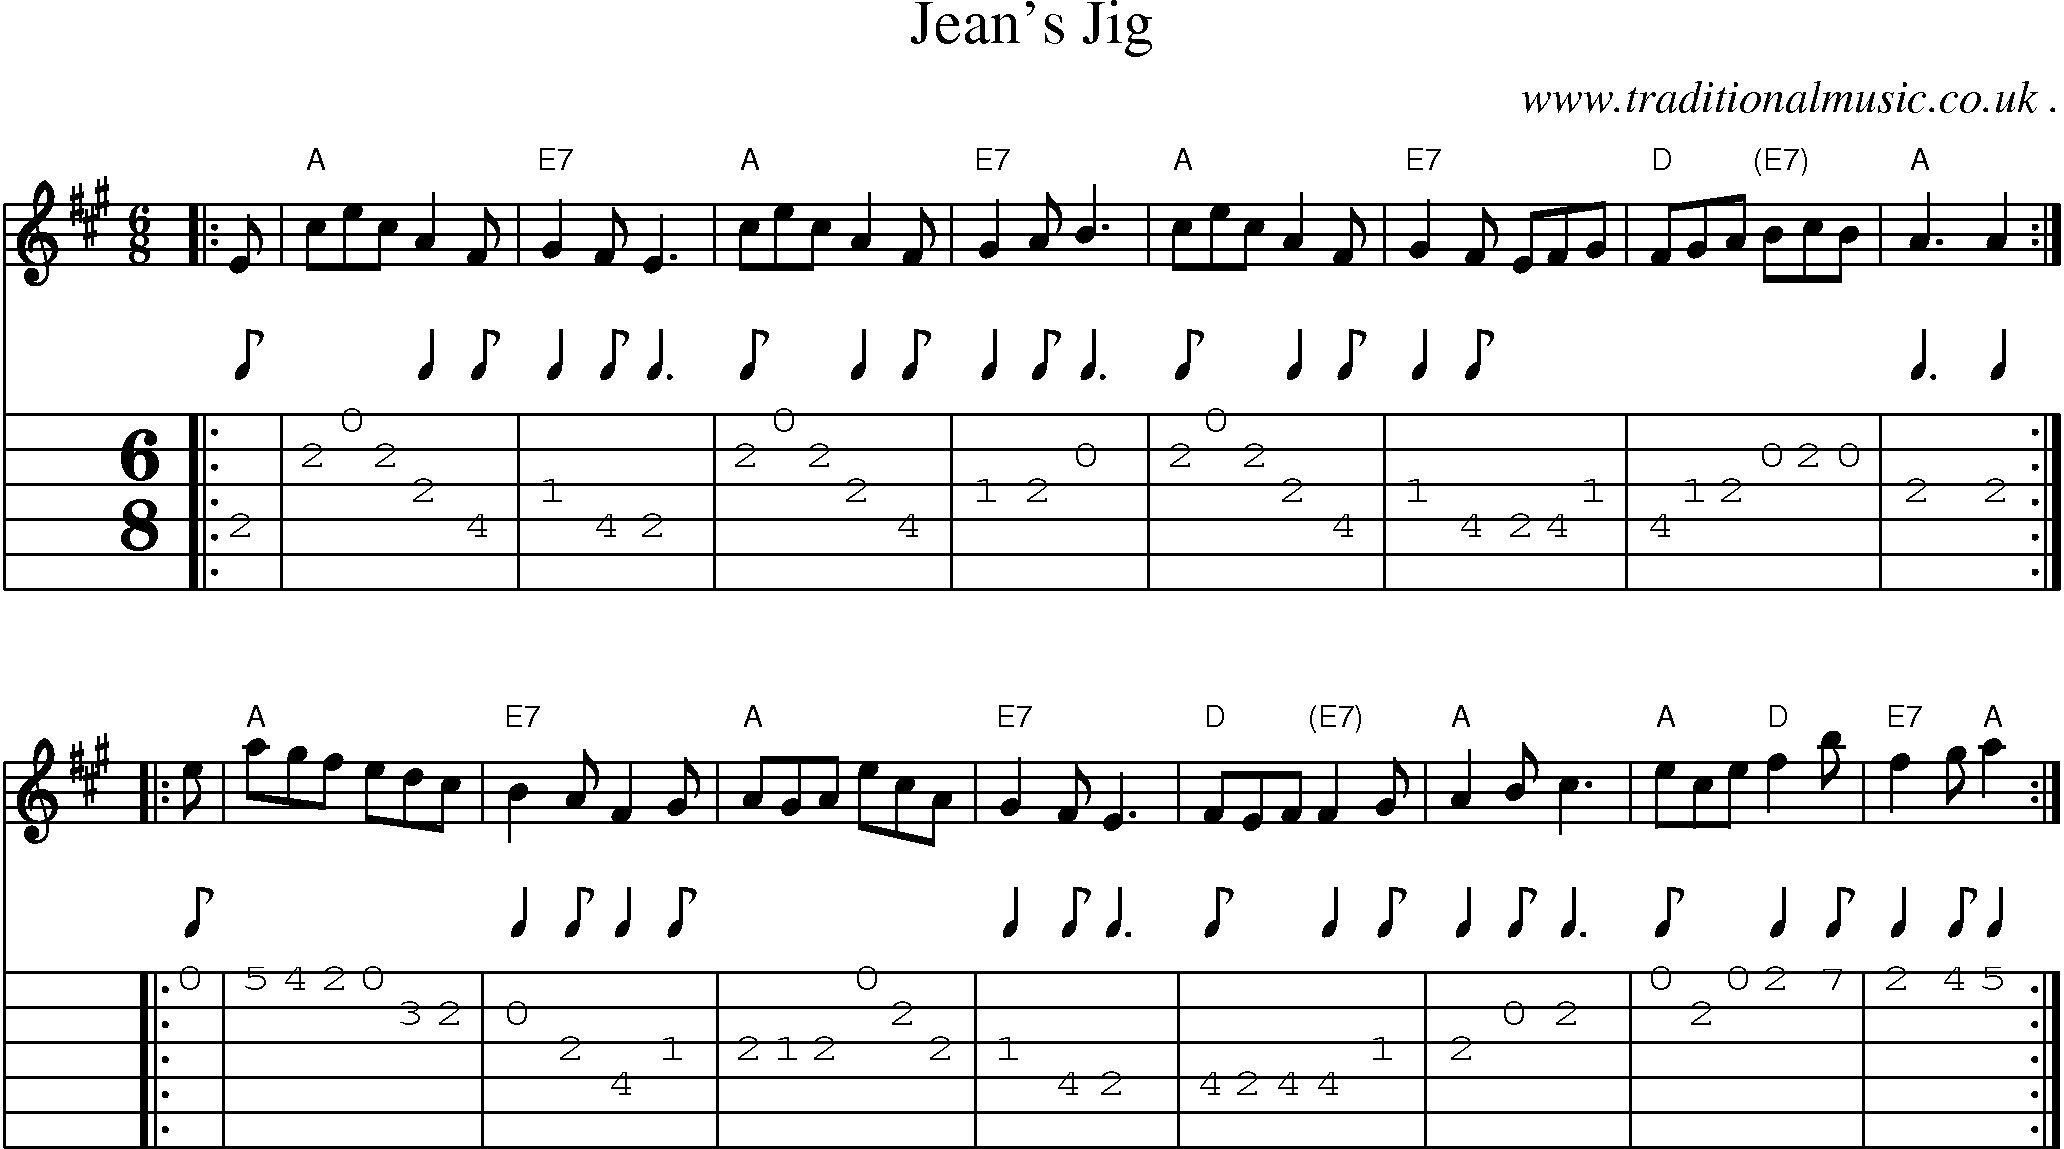 Sheet-music  score, Chords and Guitar Tabs for Jeans Jig